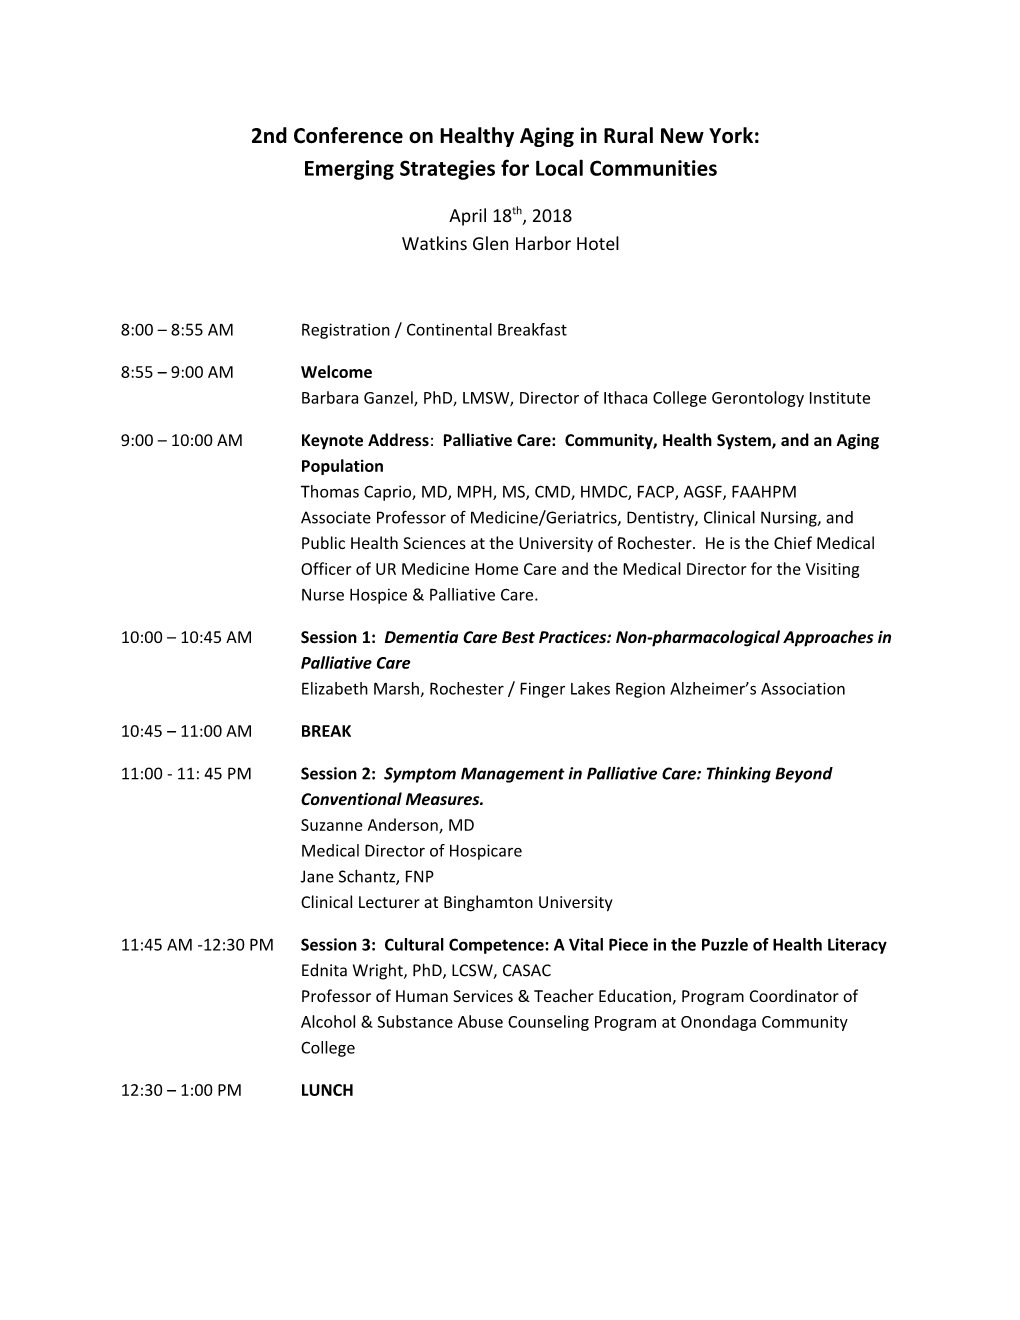 2Nd Conference on Healthy Aging in Rural New York: Emerging Strategies for Local Communities